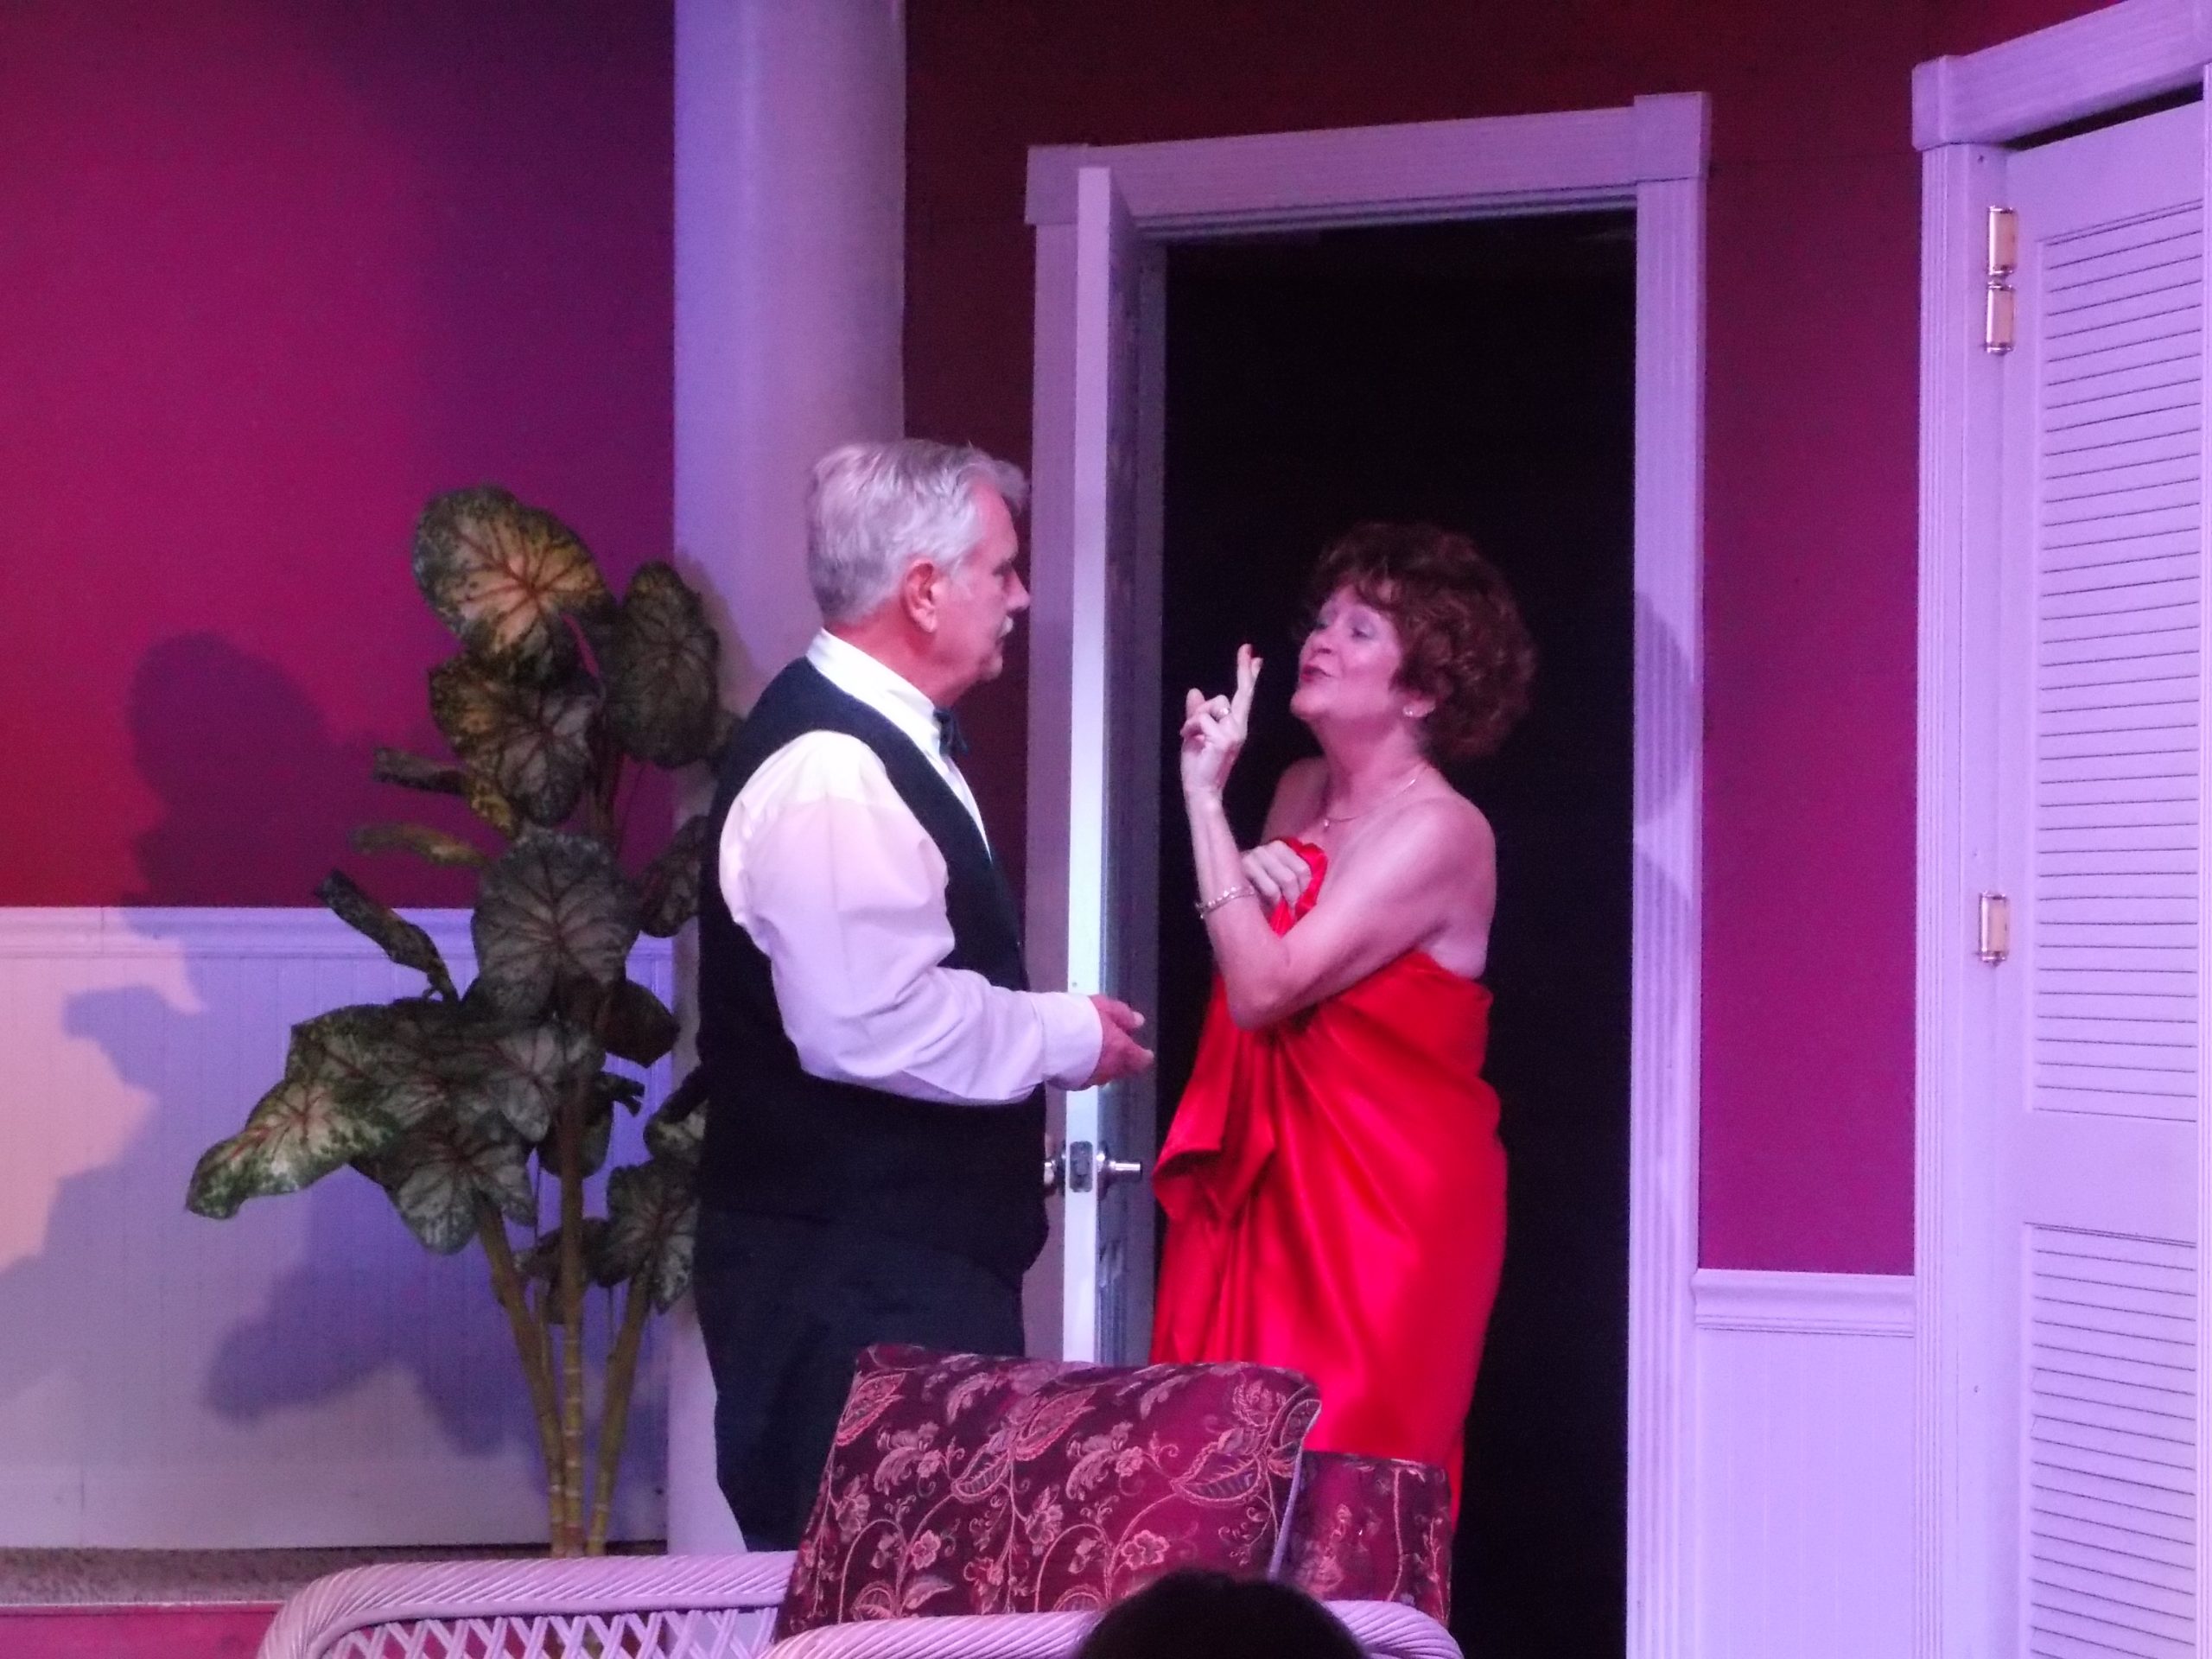 A male actor dressed in a white shirt and black tuxedo opens a door and a female actor in a red dress walks in